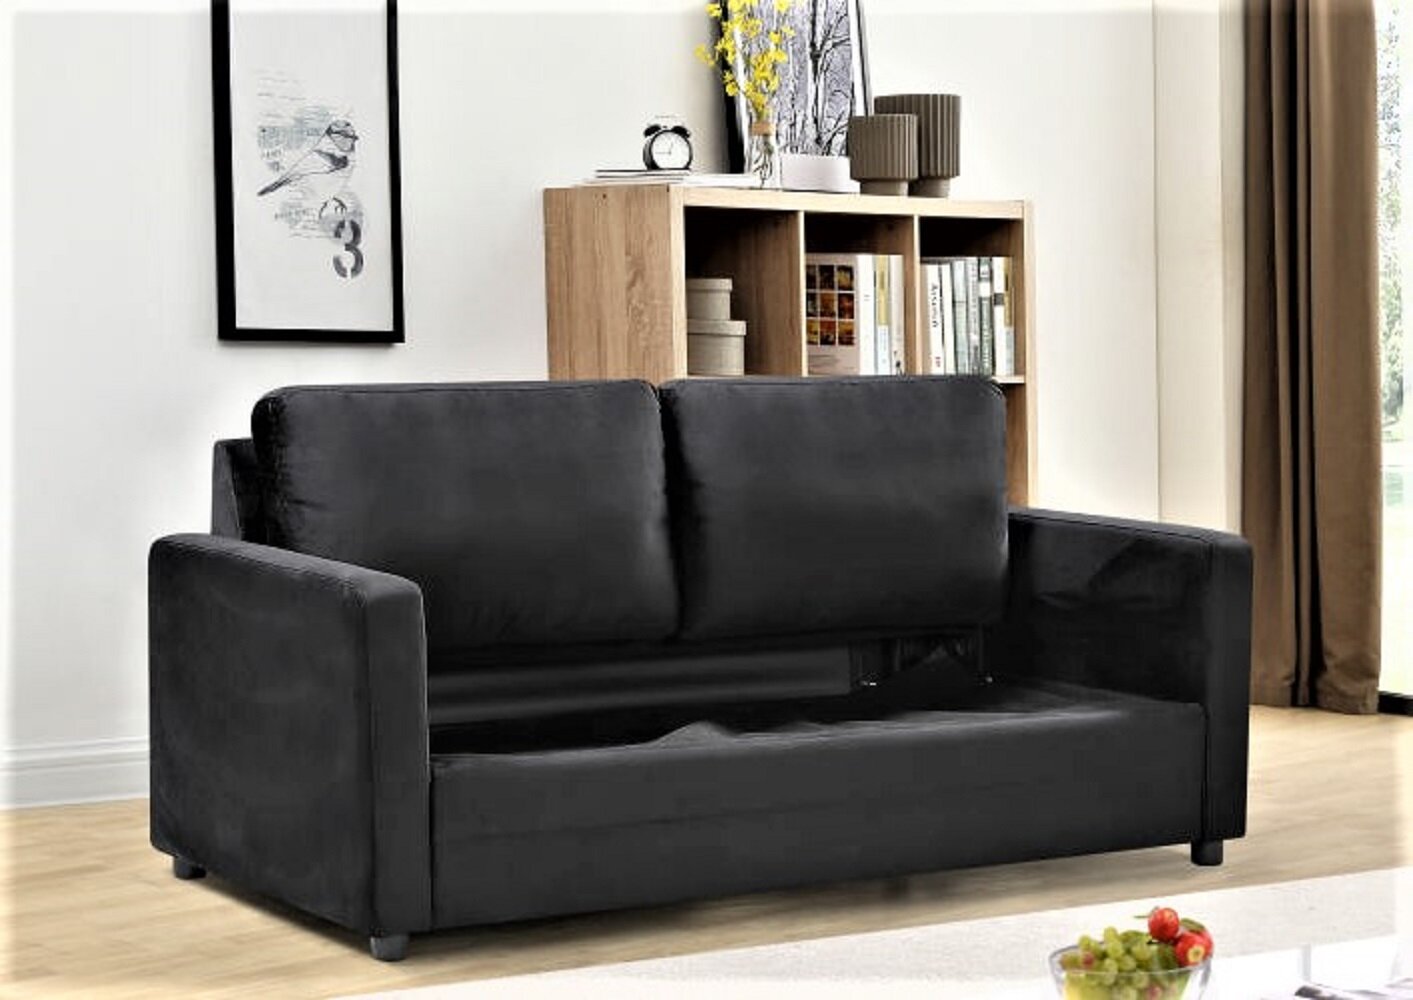 Knightsville 70” Square Arm Sofa Bed